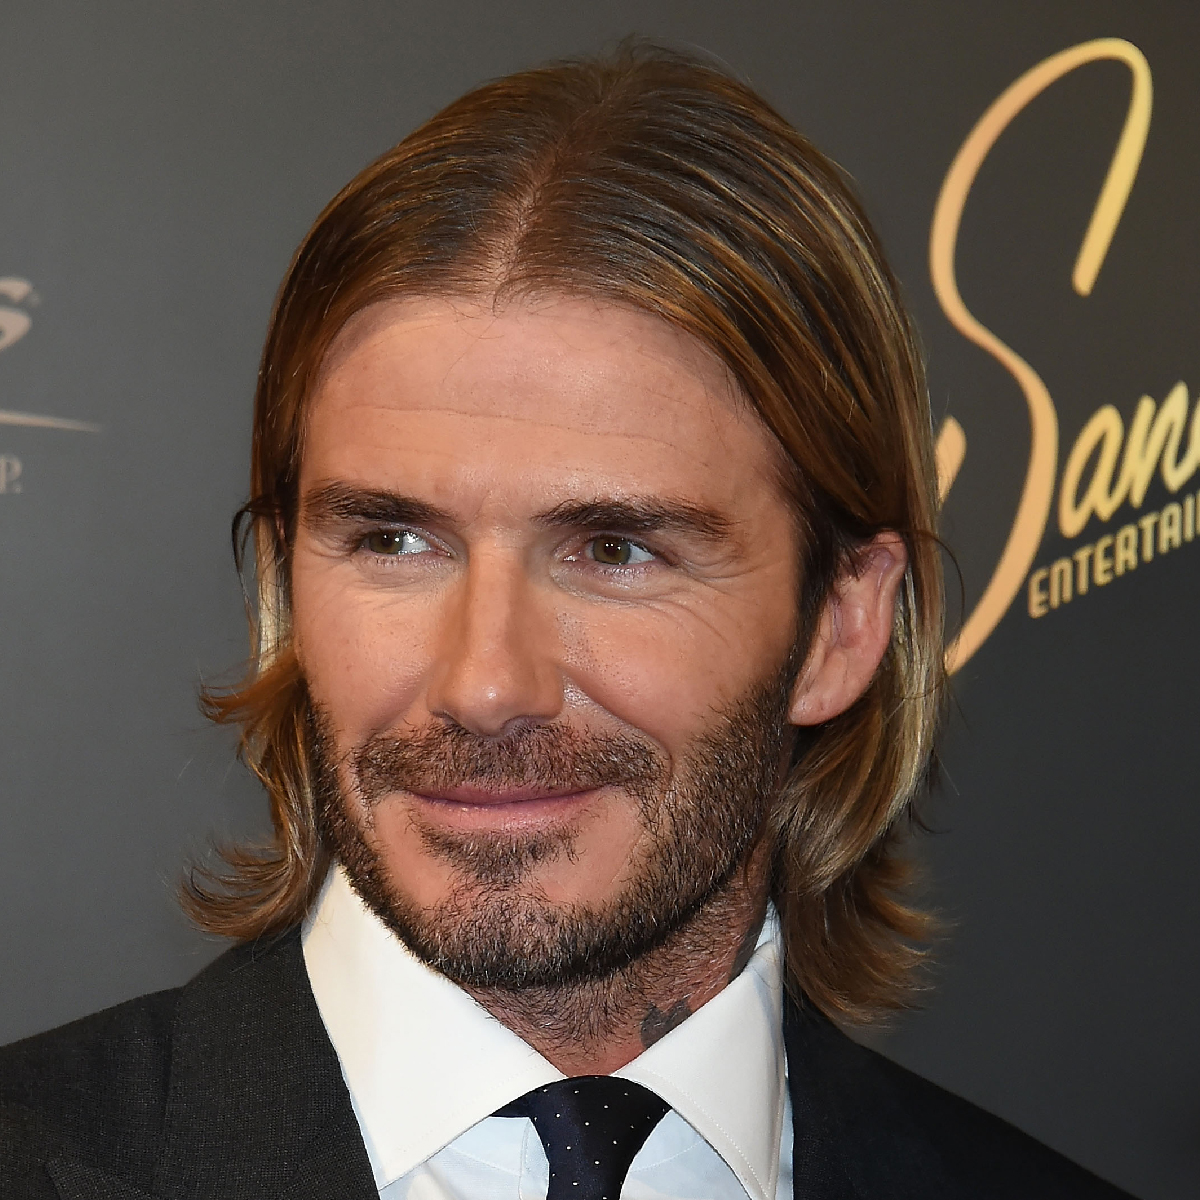 19 Times David Beckham Proved Hes The God Of Experimenting With Hairstyles